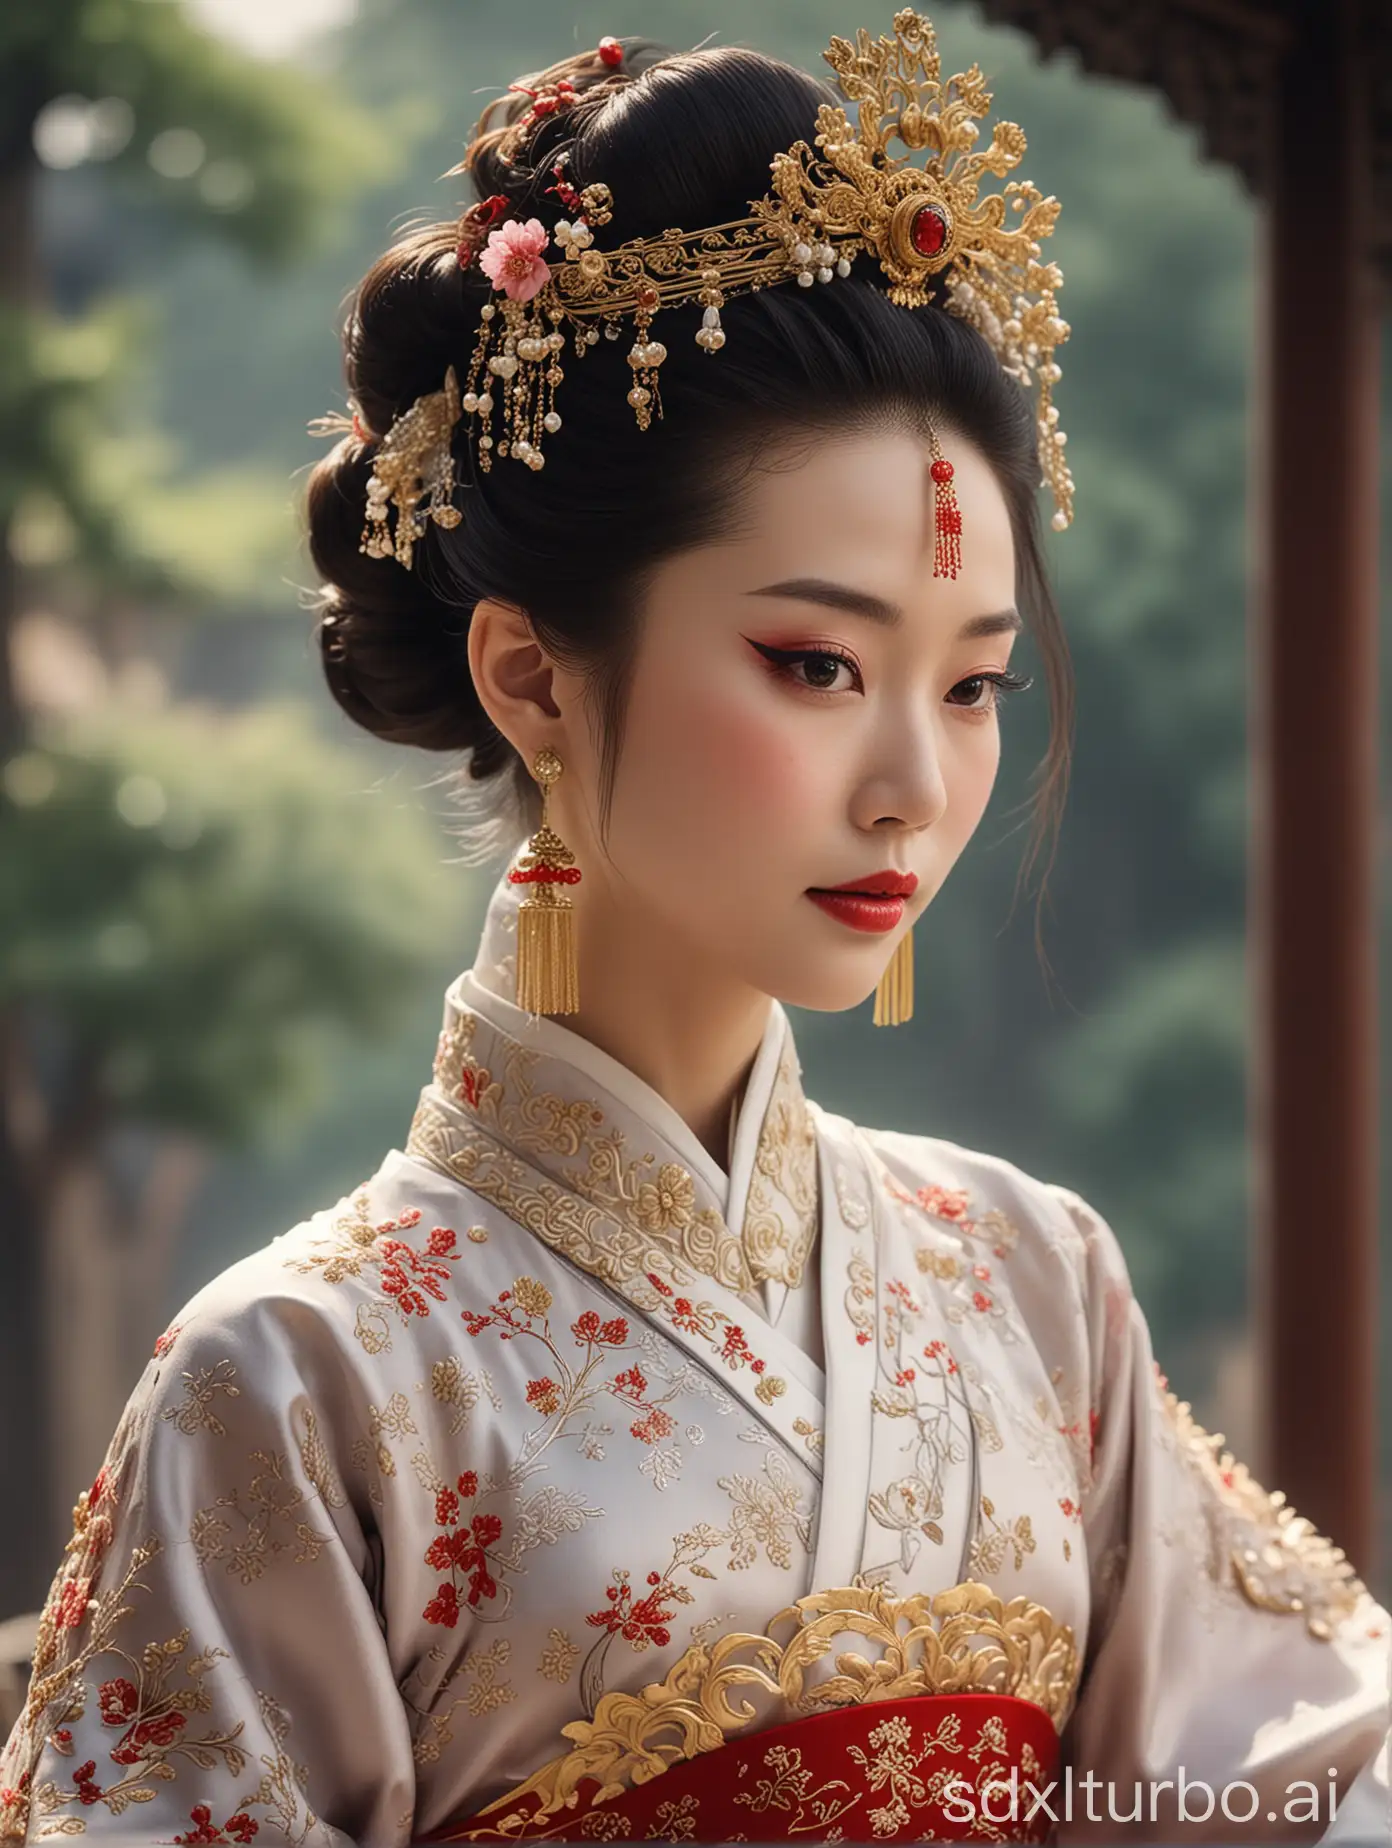 Regal-Queen-in-Traditional-Chinese-Attire